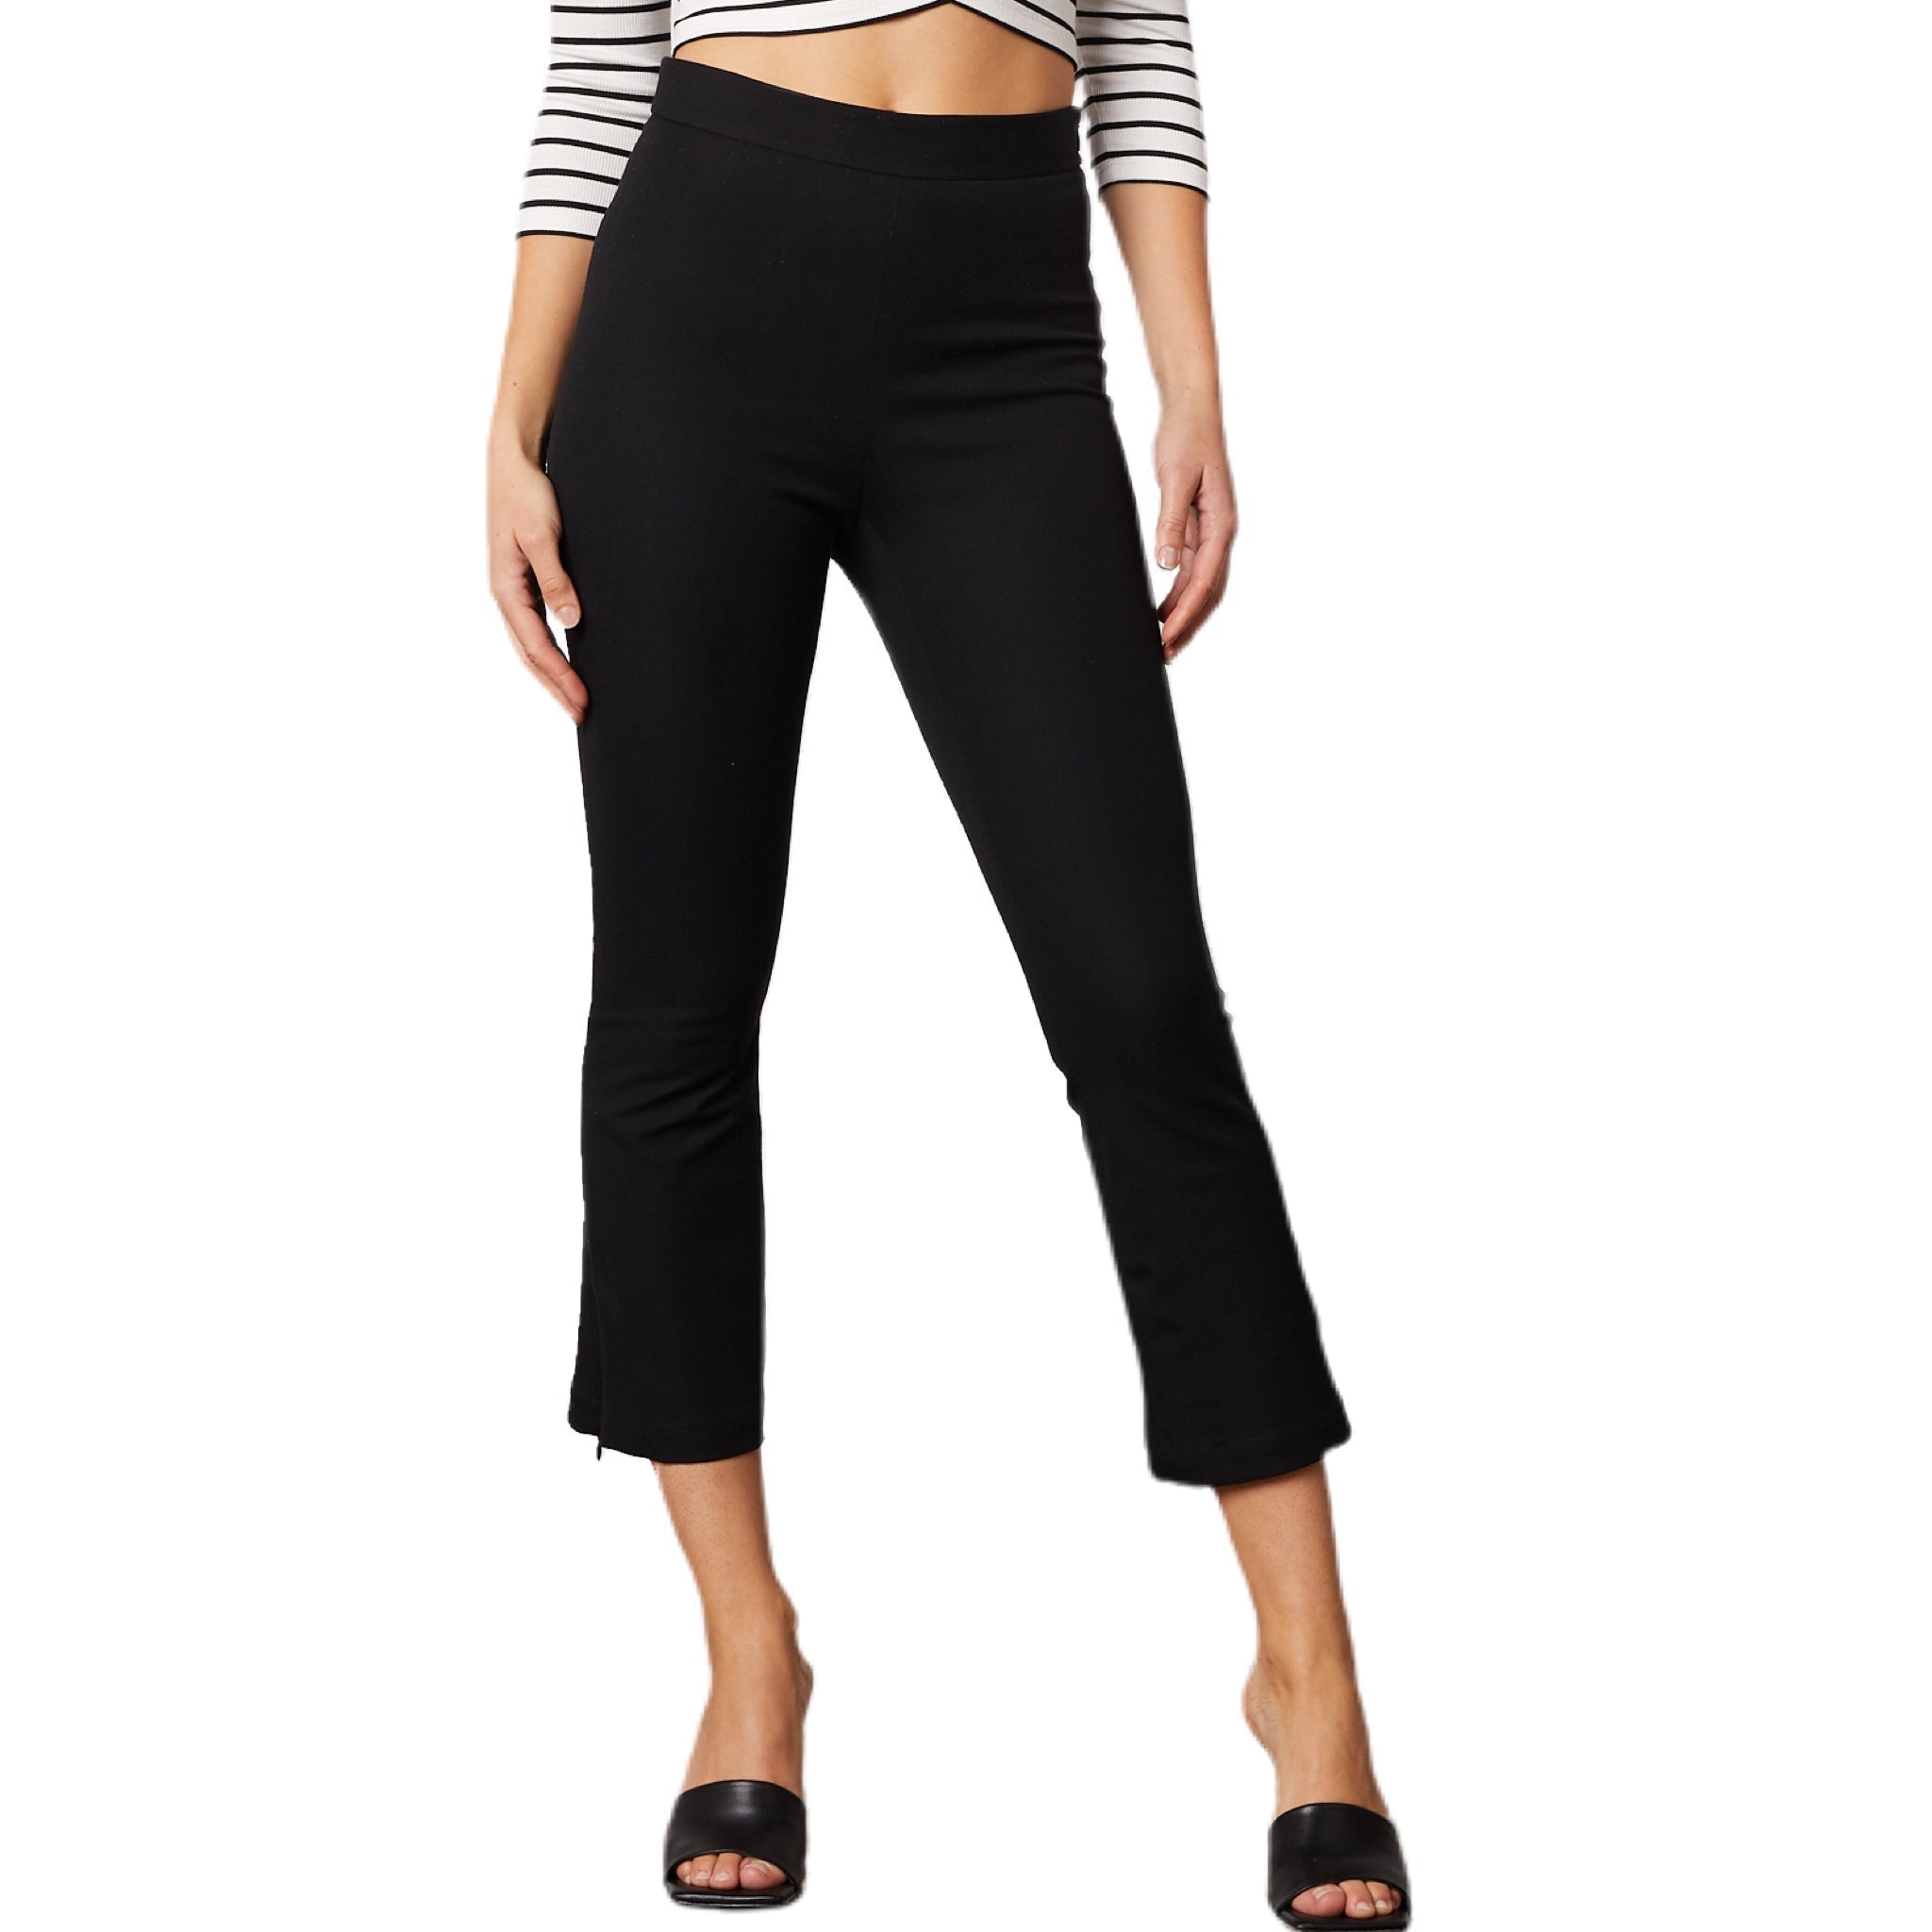 Bailey 44 Andy Twill Pant - Black - S - Safe & Chic